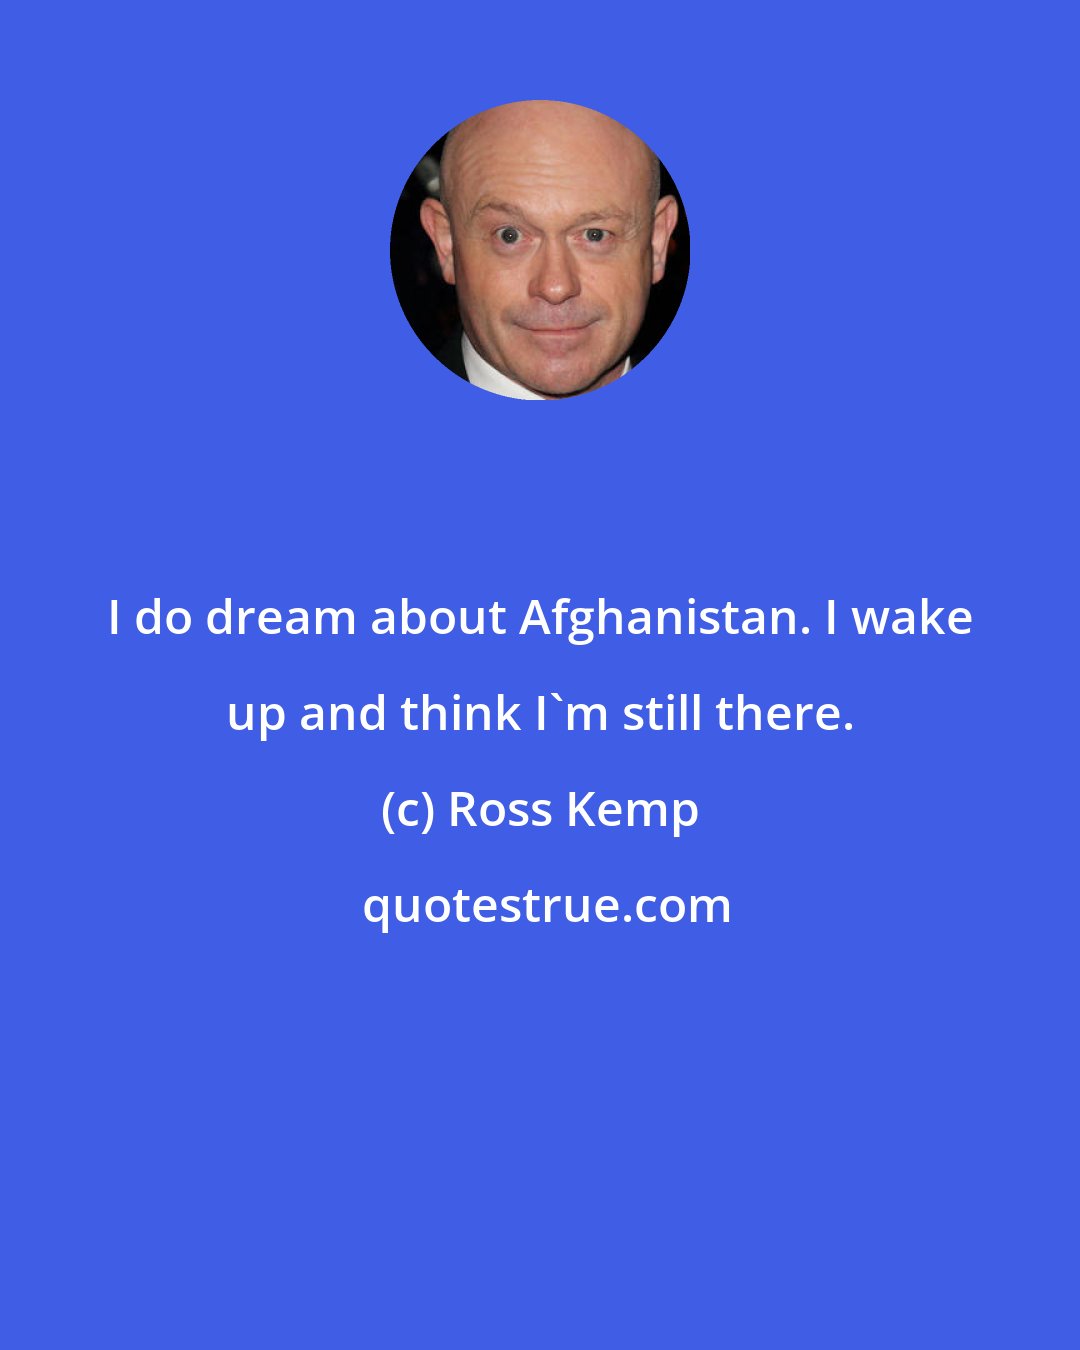 Ross Kemp: I do dream about Afghanistan. I wake up and think I'm still there.